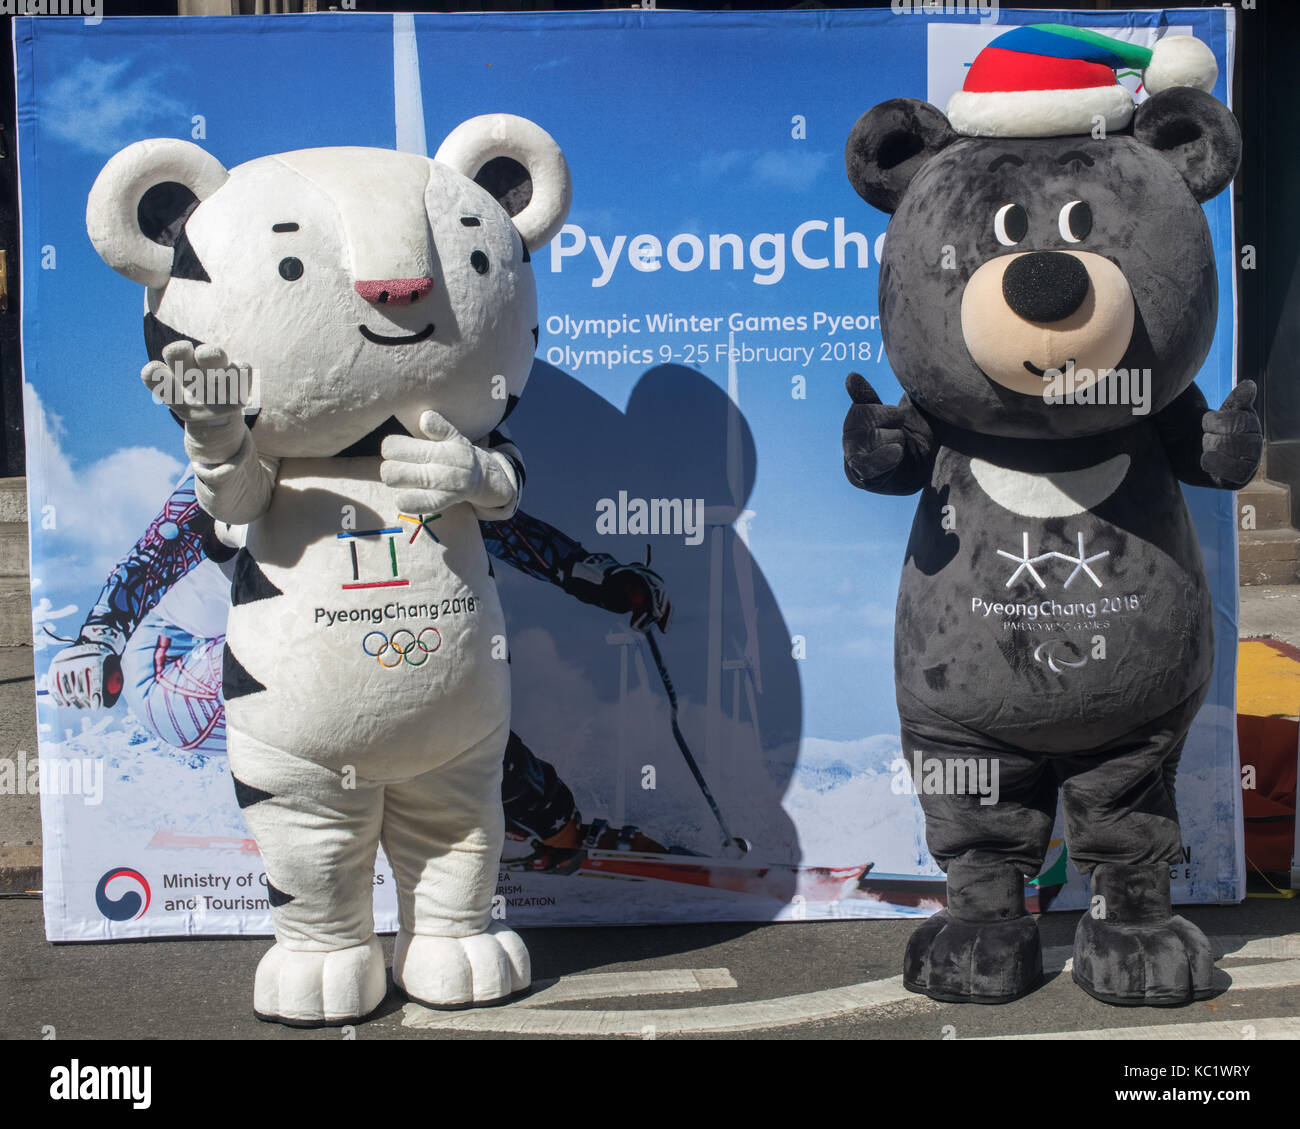 New York, USA, 1 October 2017. Soohorang (L) and Bandabi, the official mascots of the PyeongChang 2018 Winter Olympic and Winter Parlympic Games pose at a street fair in New York.  Soohorang is a symbol of strength and trust, and Korea’s guardian animal - the white tiger symbolizes protection to all the athletes and spectators at the 2018 Winter Games. Bandabi is a symbol of strong will and patience, and of the host province of Gangwon. The Asiatic black bear embodies the spirit of the paralympics. Photo by Enrique Shore/Alamy Live News Stock Photo